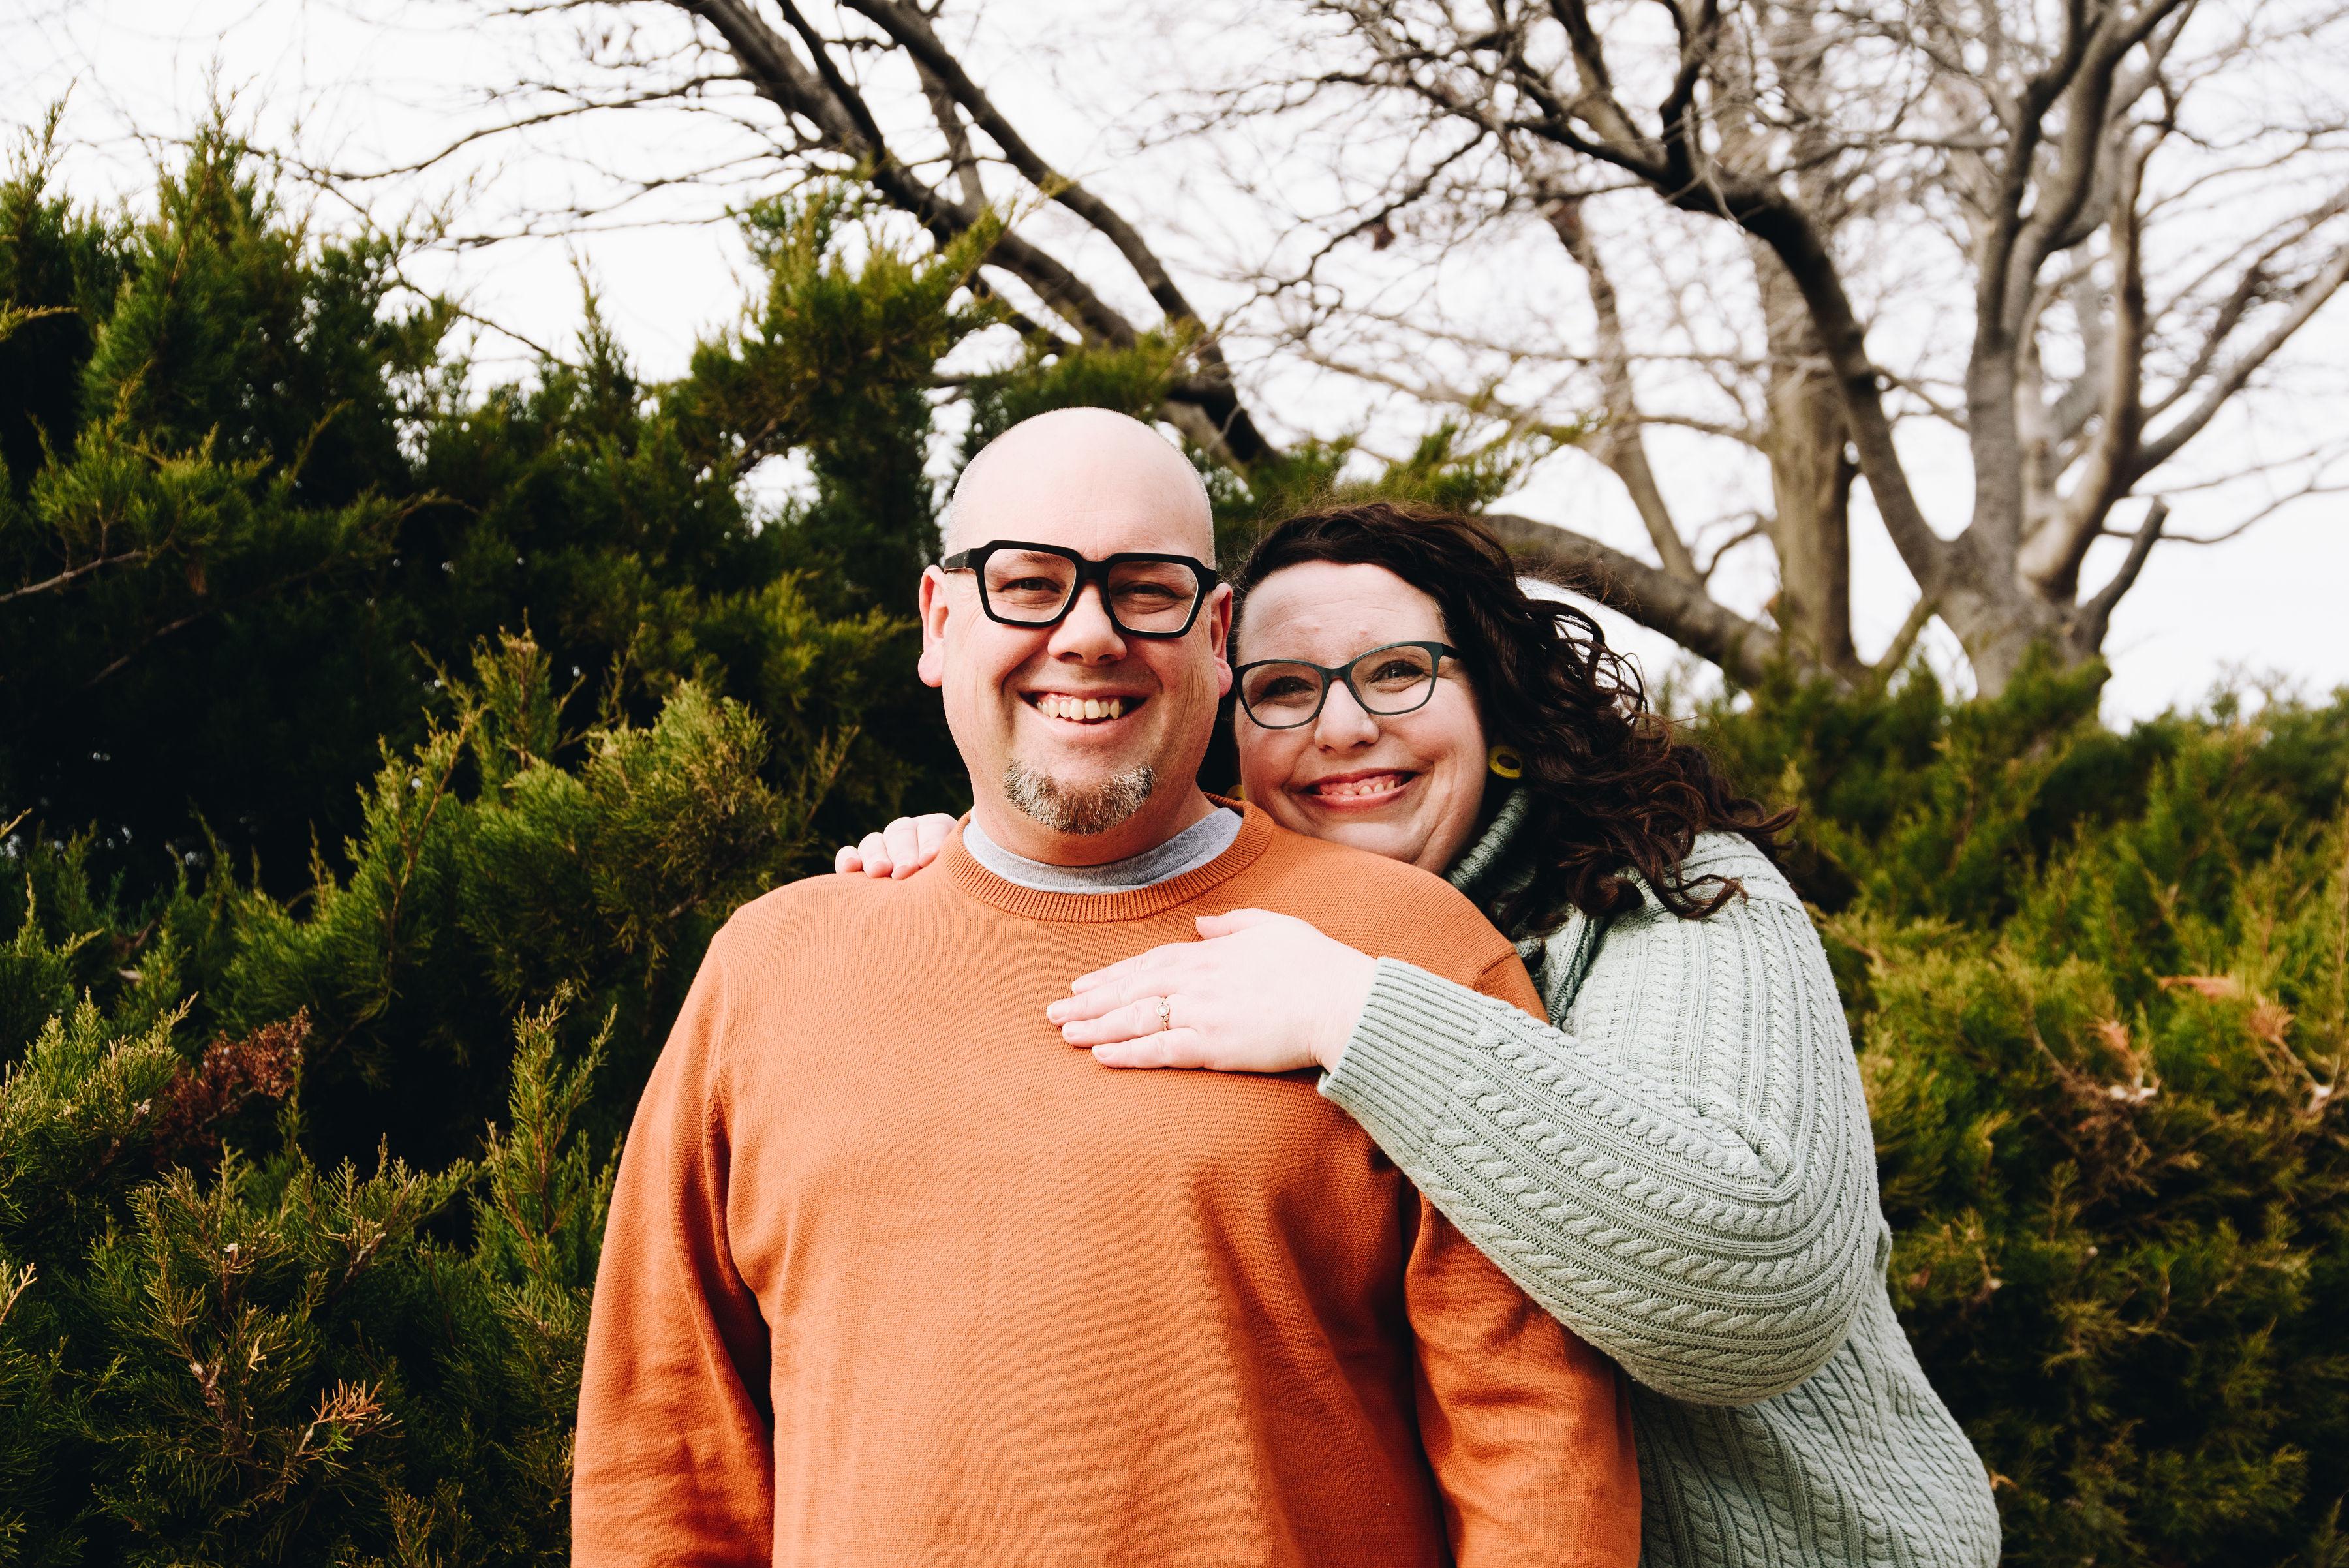 The Wedding Website of Stacey Burgess and Jeff Rennison